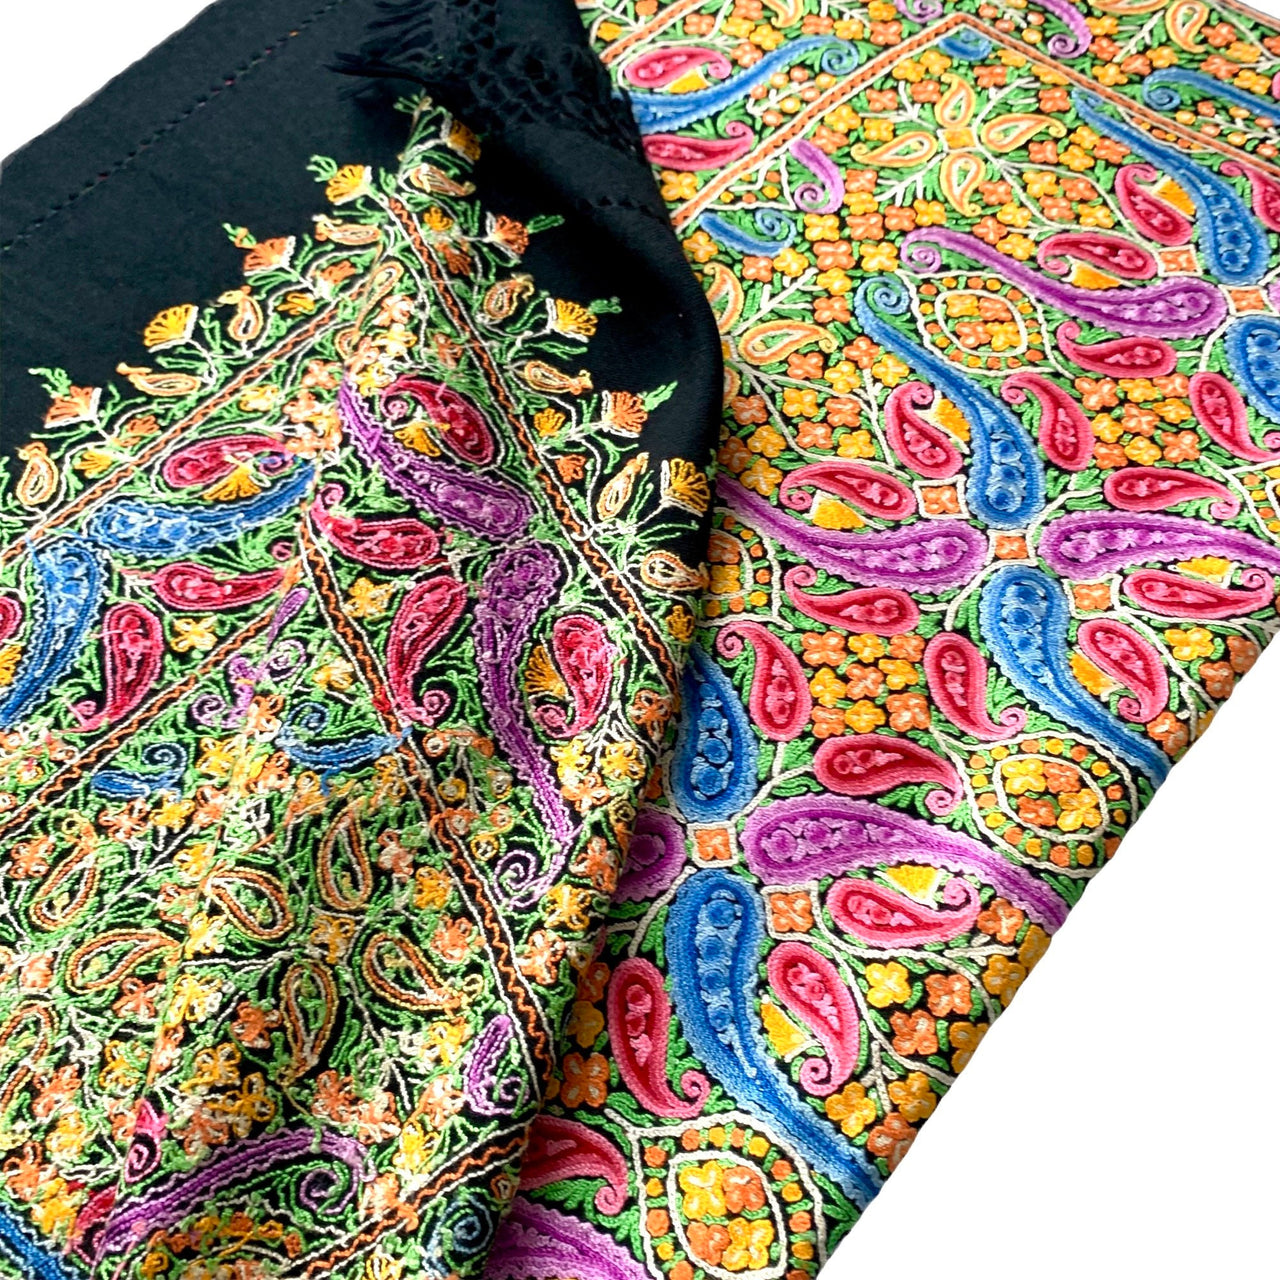 Stunning Black Wool Shawl  Multi-Coloured Silk Embroidered Scarf Stole women’s Wrap